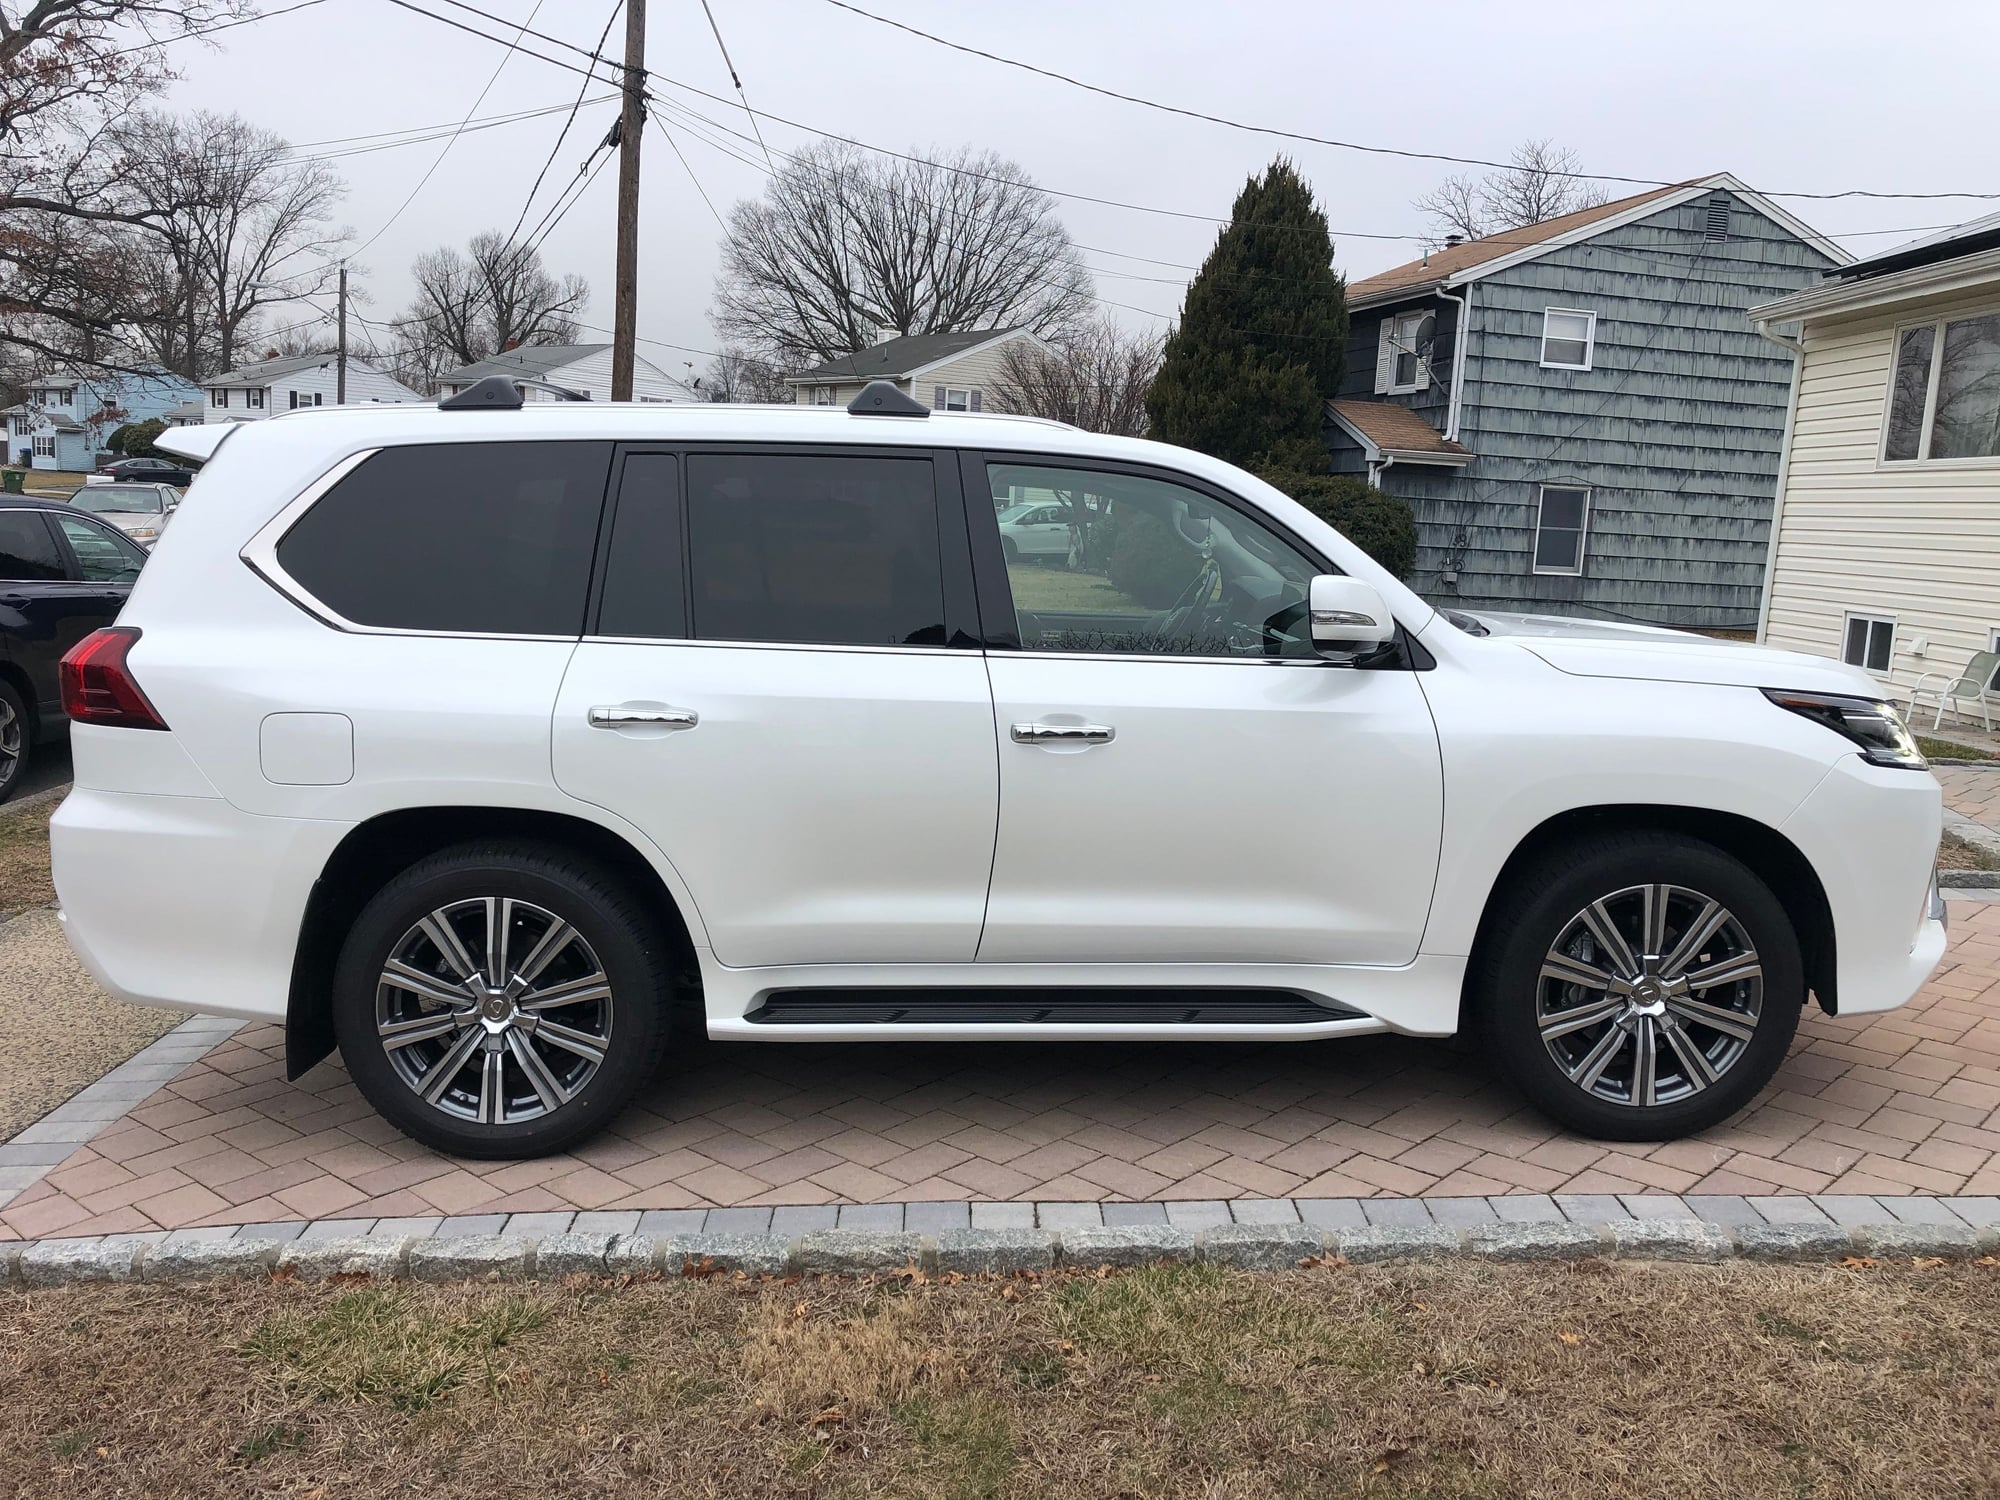 2017 Lexus LX570 - 2017 LX570 White with Cabernet, $99xxx MSRP ONLY 9700 miles - Used - VIN JTJHY7AX1H4240479 - 9,664 Miles - 8 cyl - AWD - Automatic - SUV - White - Edison, NJ 08817, United States